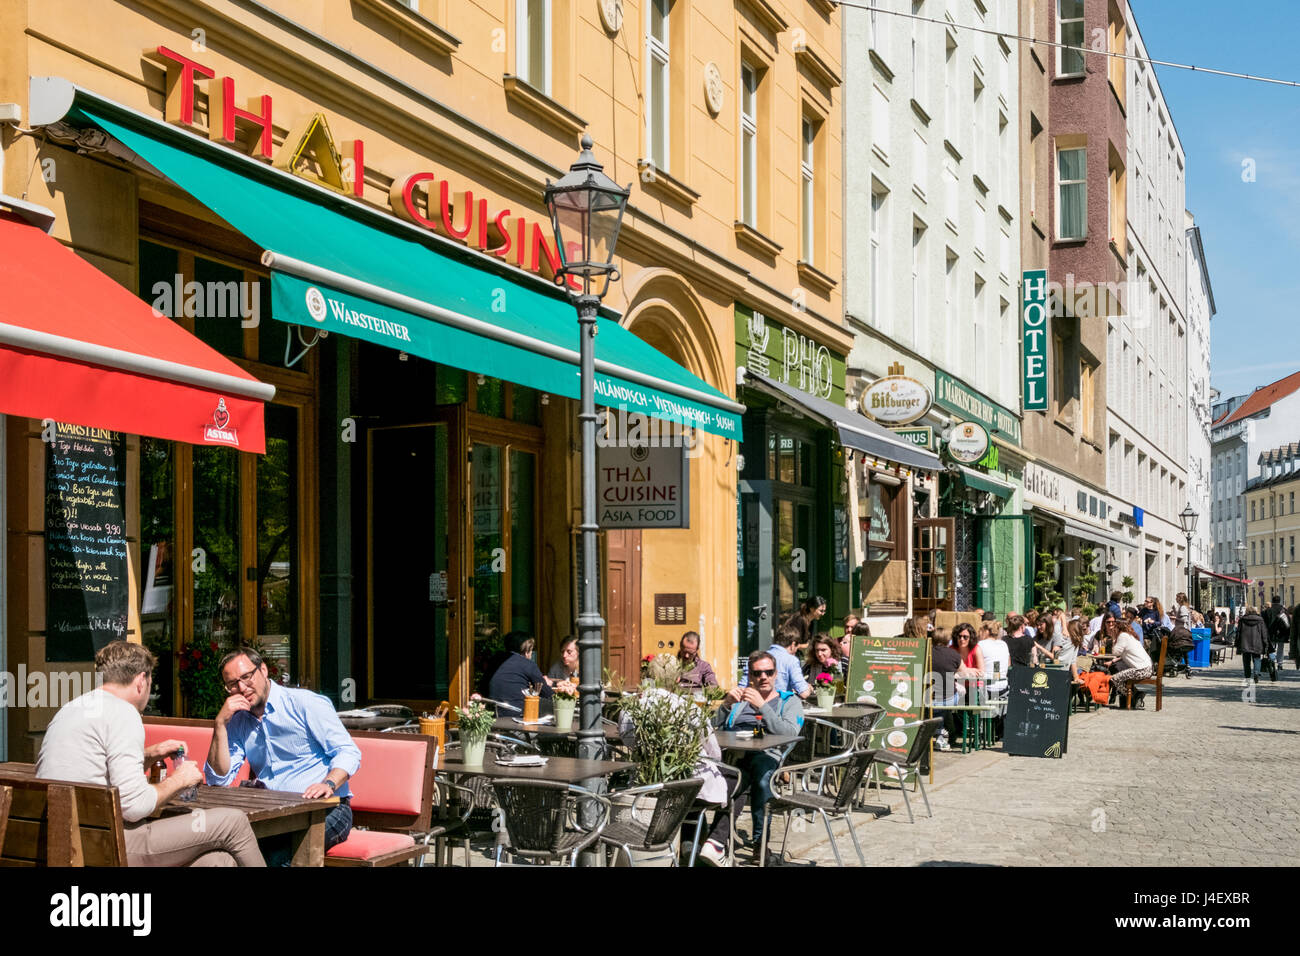 Berlin, Germany - may 11, 2017: People sitting in restaurants and cafes in the streets of Berlin Mitte on a sunny day. Stock Photo